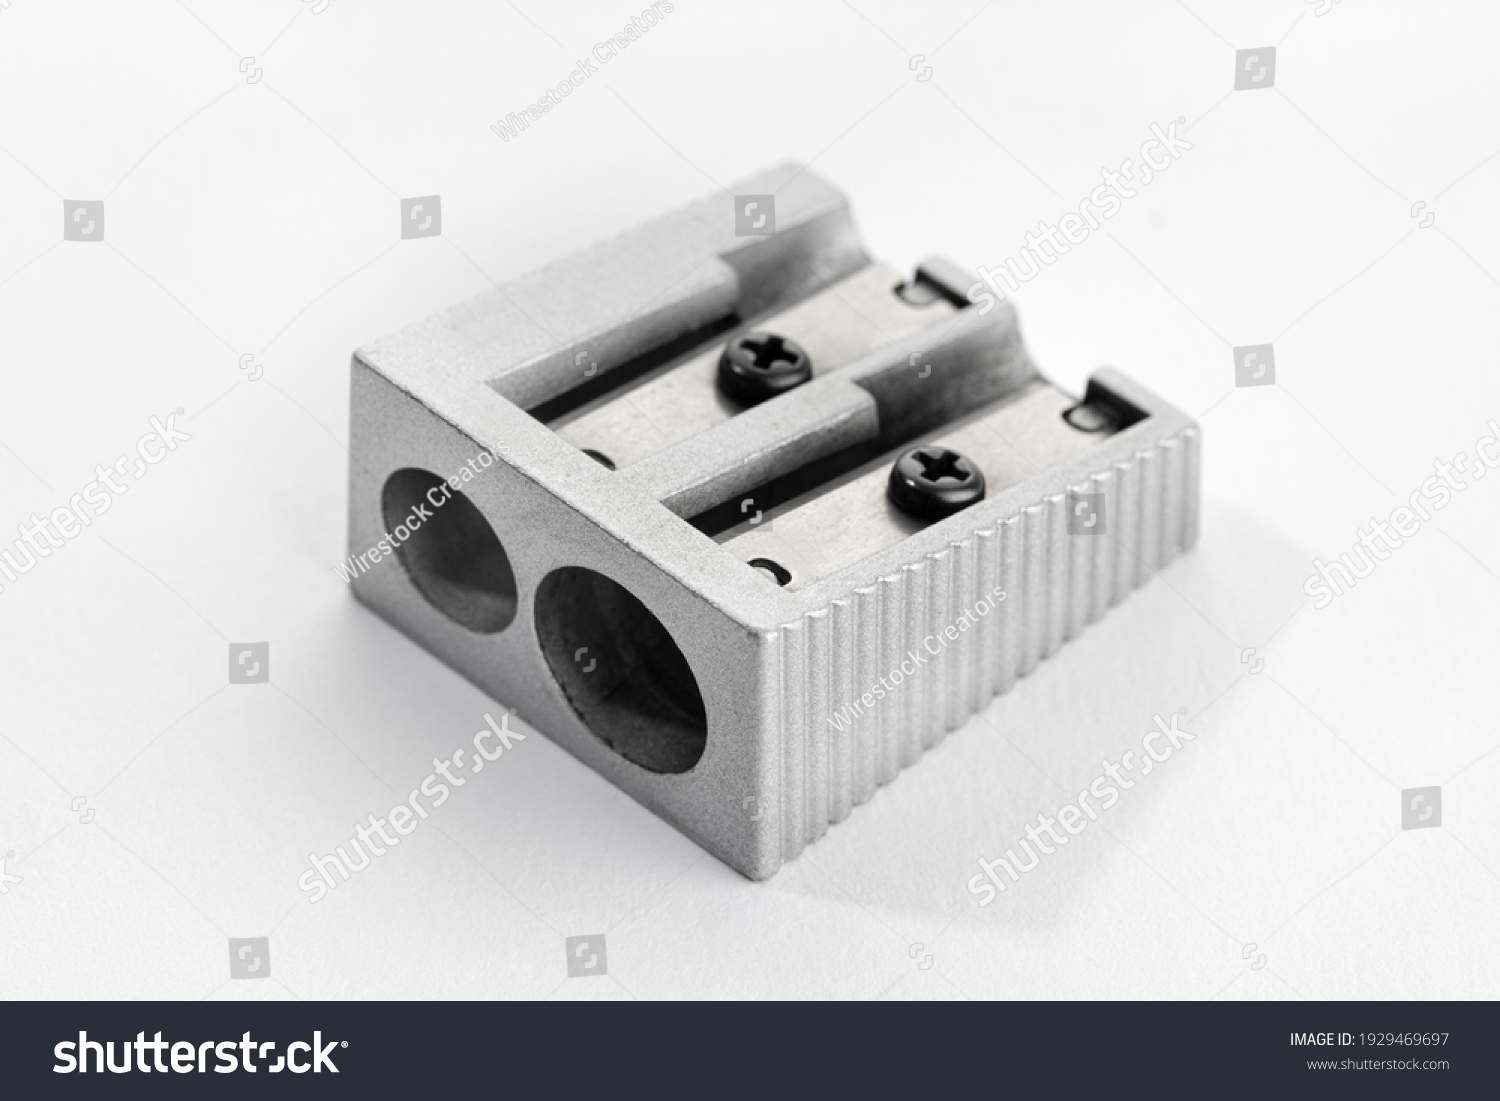 Metallic pencil sharpener with Double Hole isolated on white background #1929469697